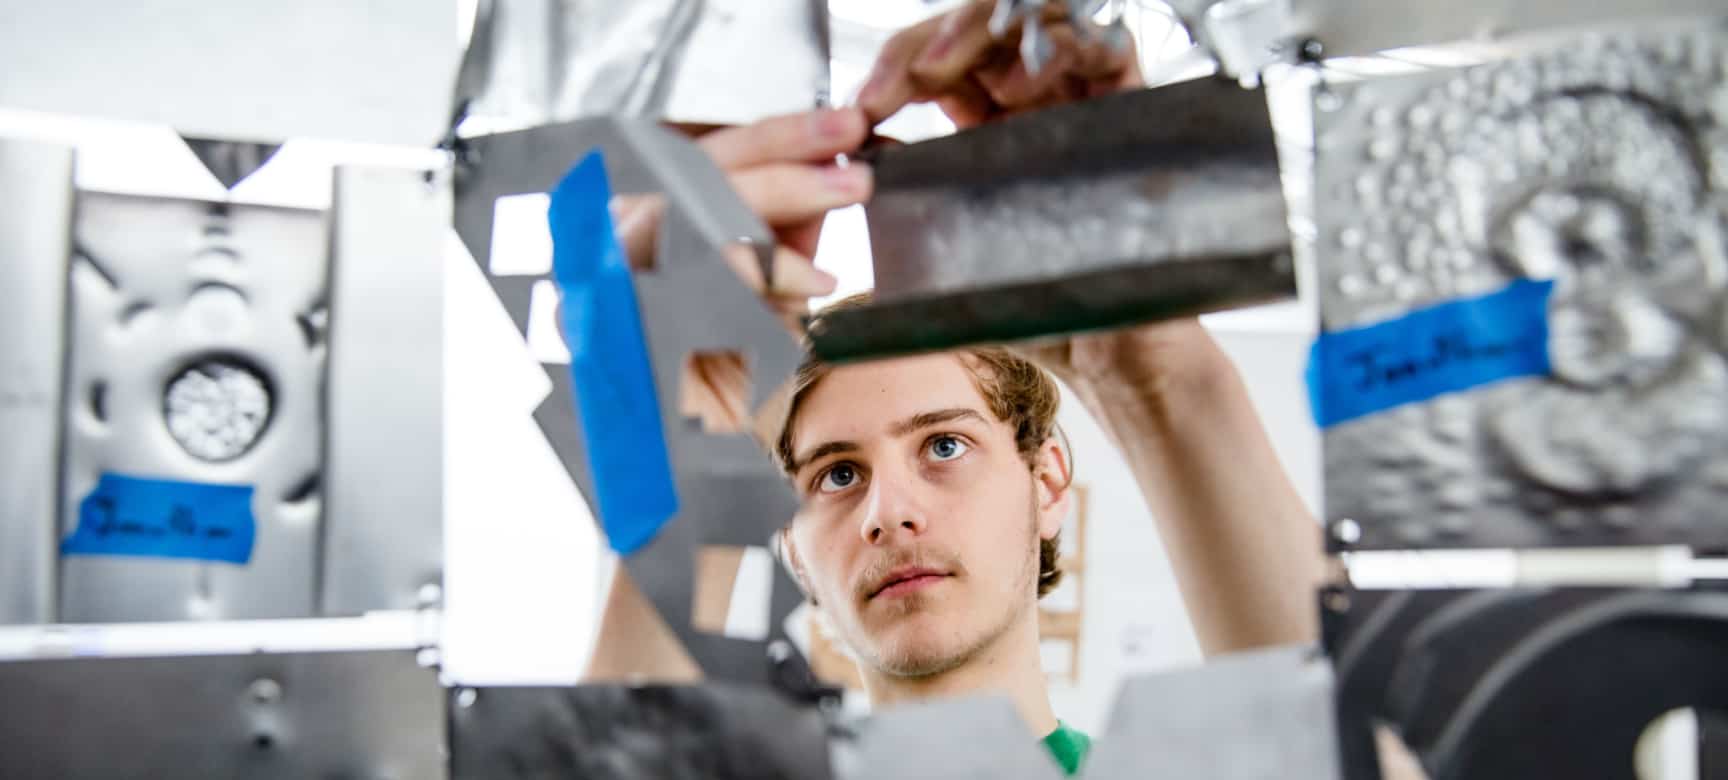 A male student is featured in focus as he holds up a piece of metal for examination. Other metal components are shown as blurred in the foreground.